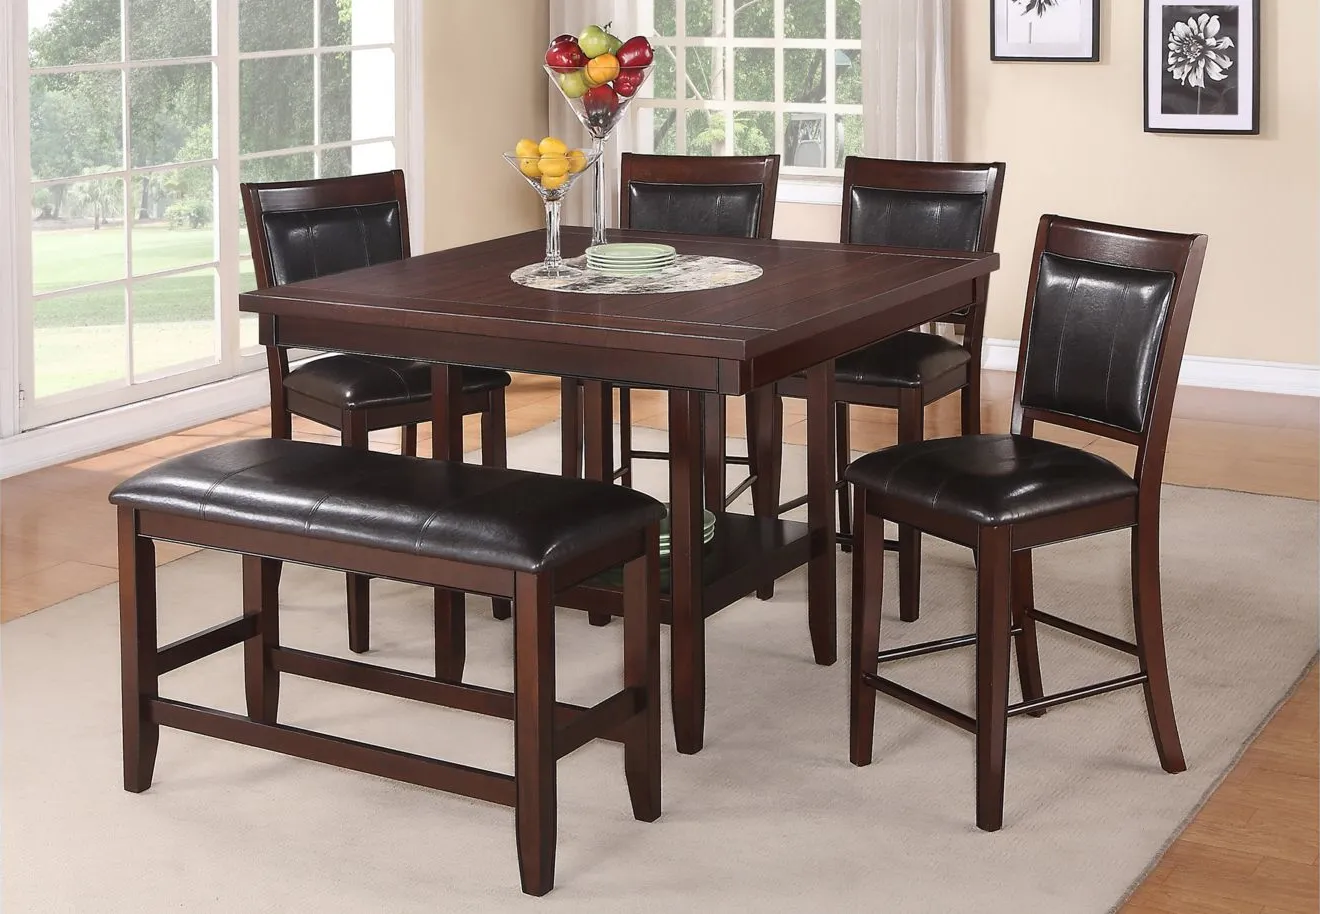 Fulton 6-pc. Counter-Height Dining Set w/Bench in Espresso by Crown Mark